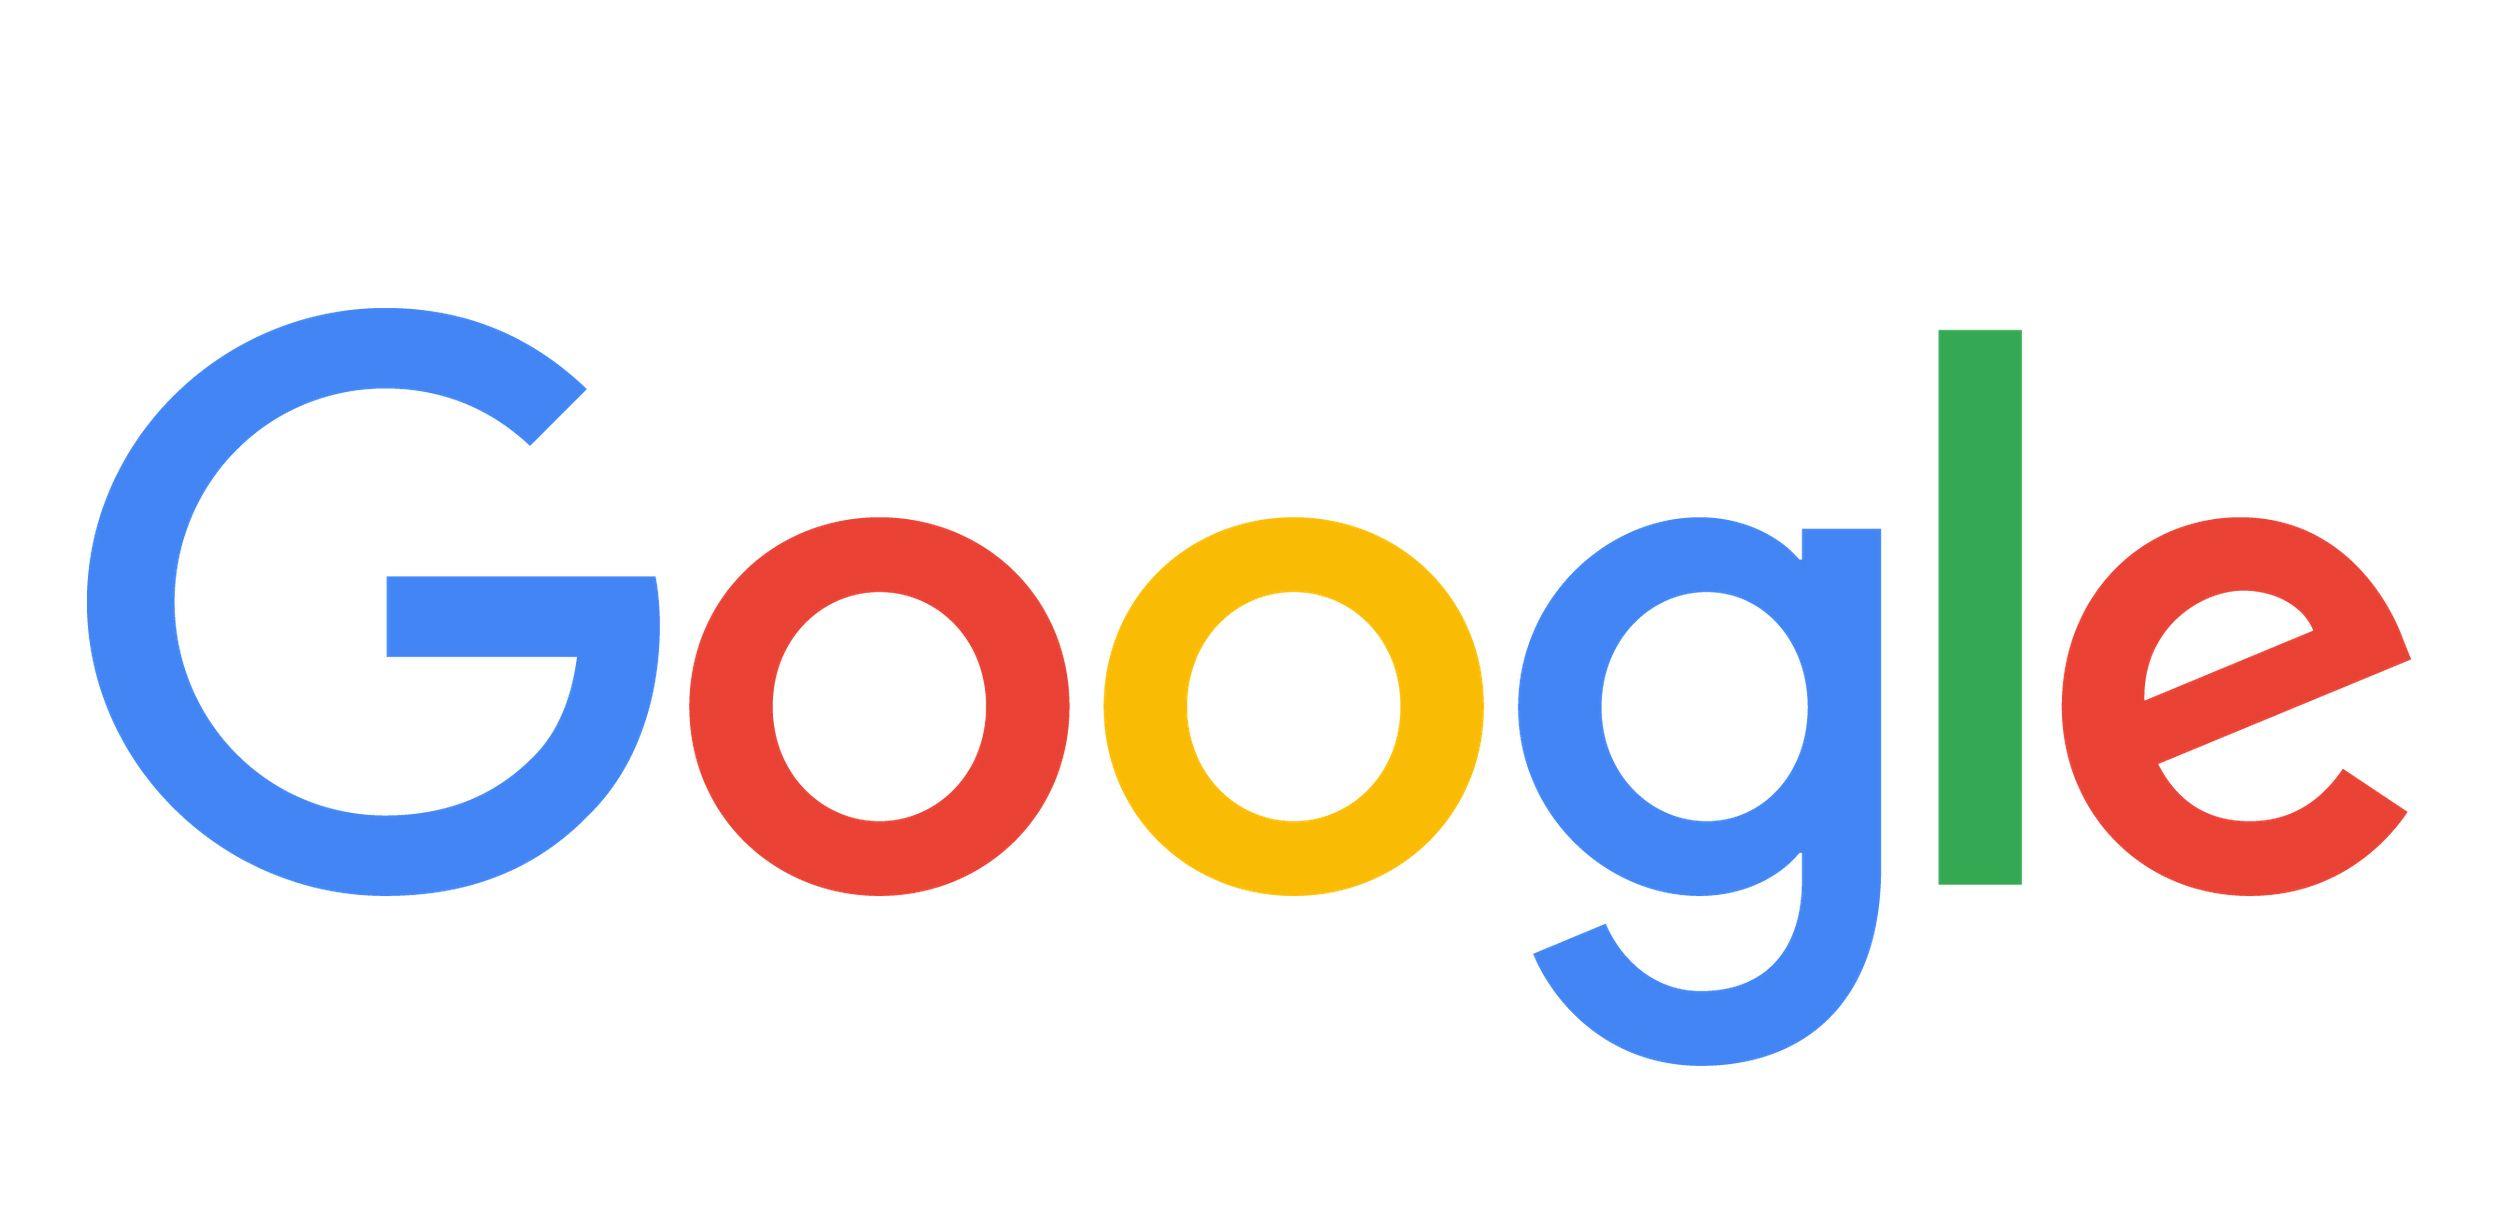 20 Best Logo - Google Doodles at 20: the changing faces of the Google logo